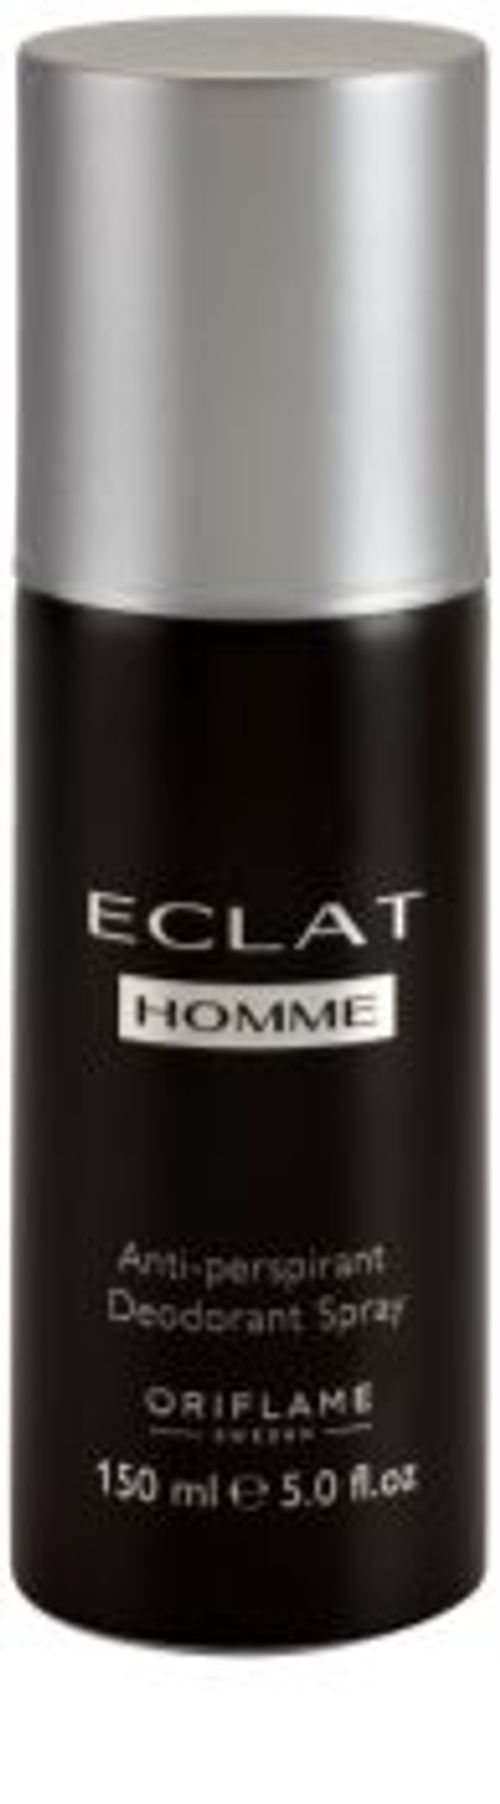 Oriflame Eclat Homme Deo Spray for Men 150 ml